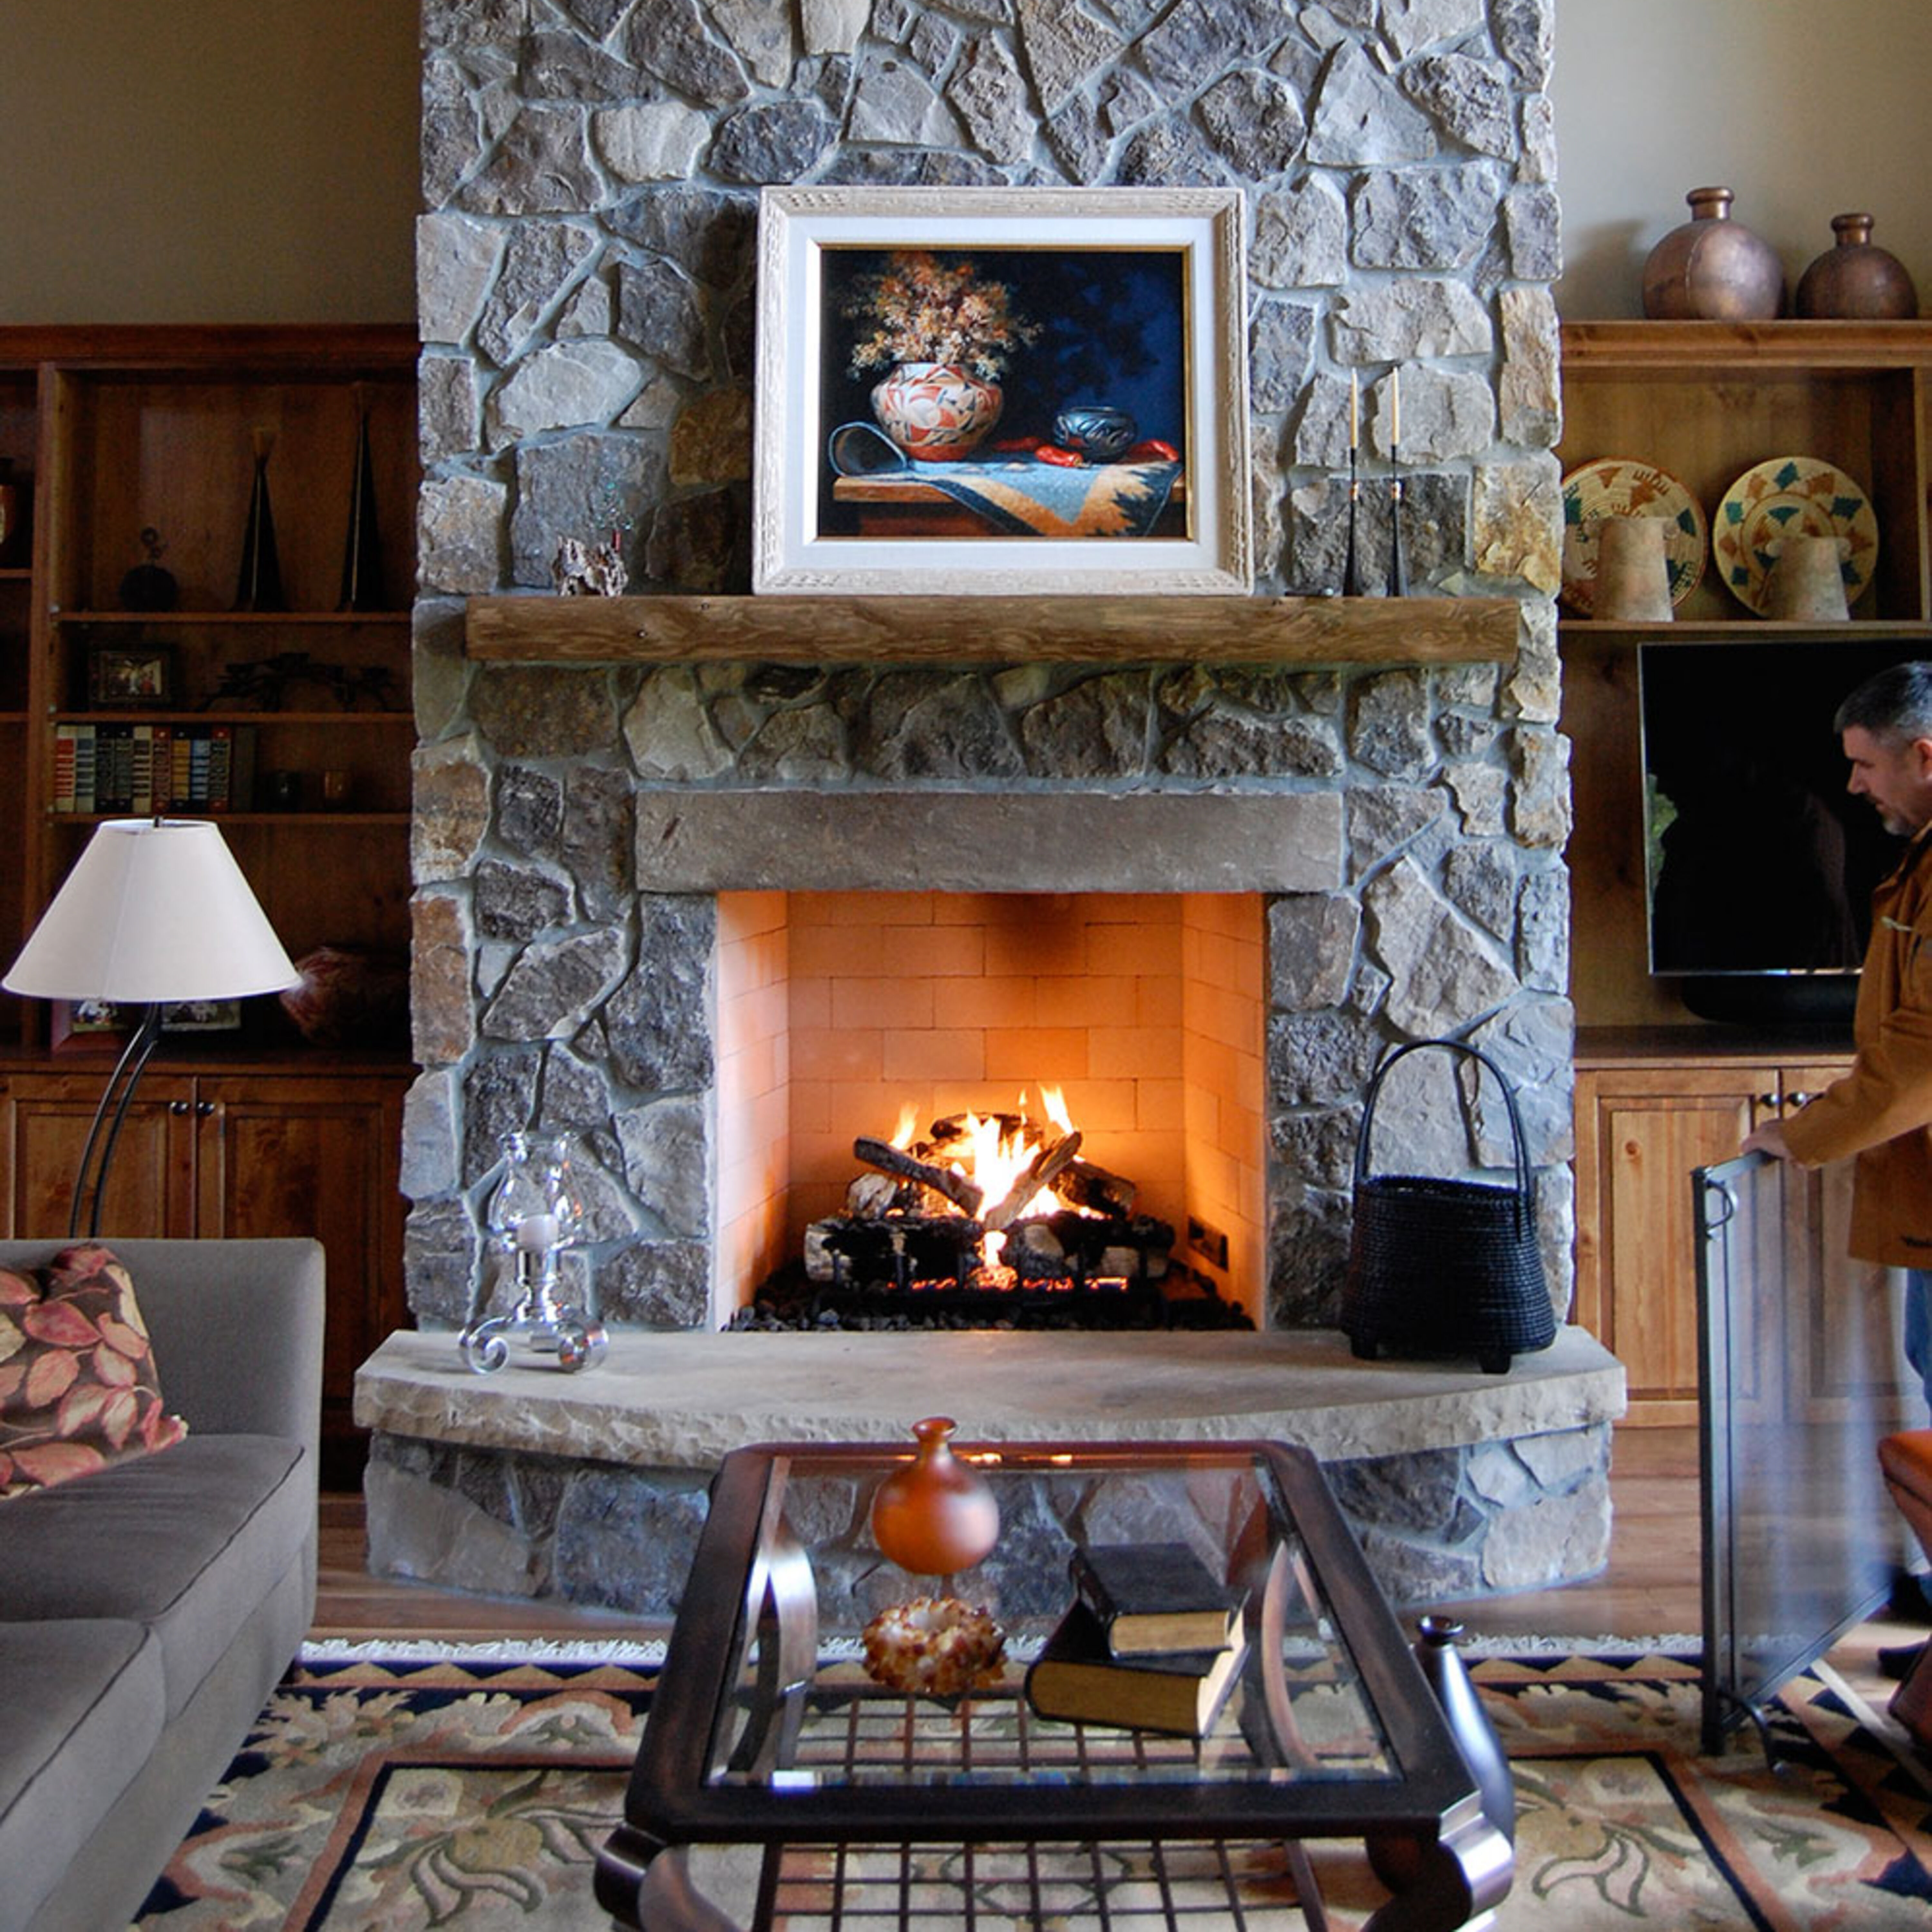 The Isokern B-Vetto Gas Fireplace installed on a rustic, stone hearth with a wooden mantel and traditional-style decor.